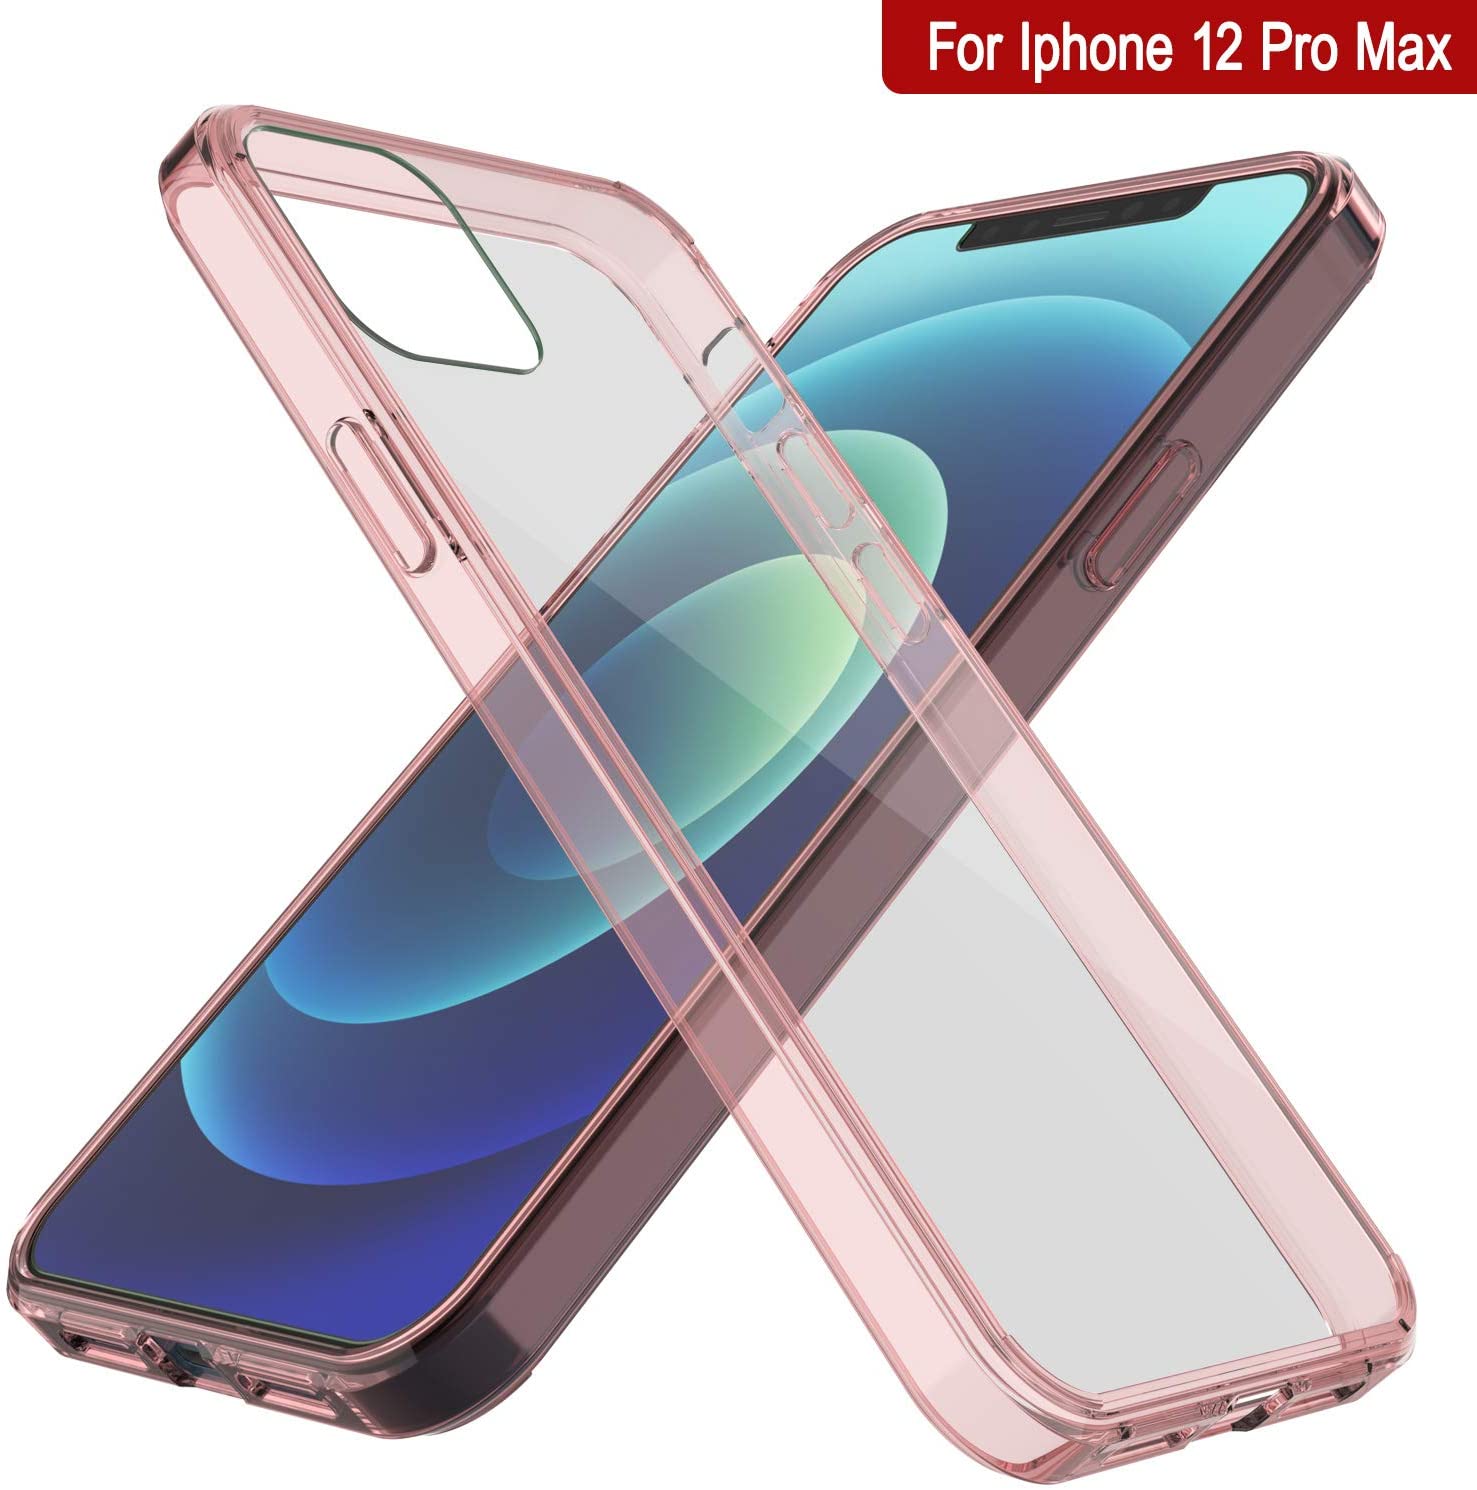 iPhone 12 Pro Max Case Punkcase® LUCID 2.0 Crystal Pink Series w/ PUNK SHIELD Screen Protector | Ultra Fit